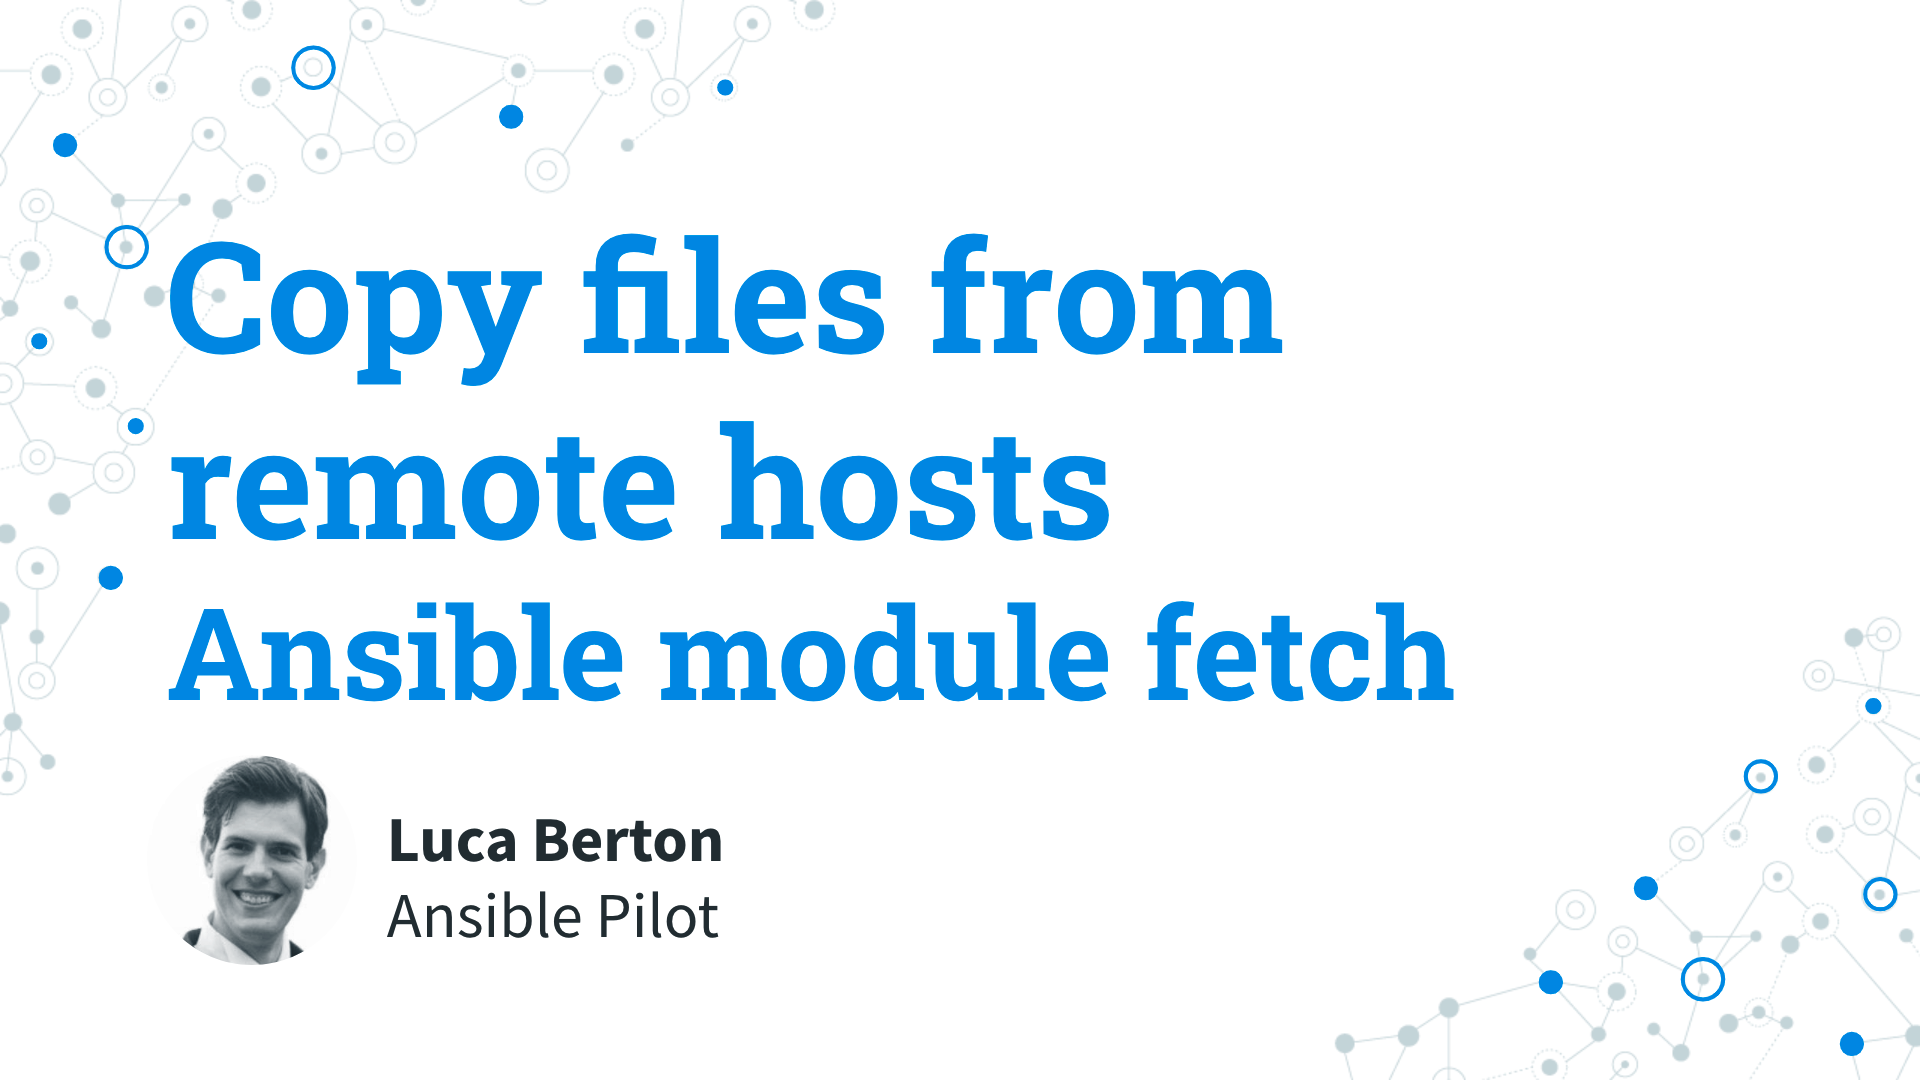 Copy files from remote hosts - Remote to Local - Ansible module fetch